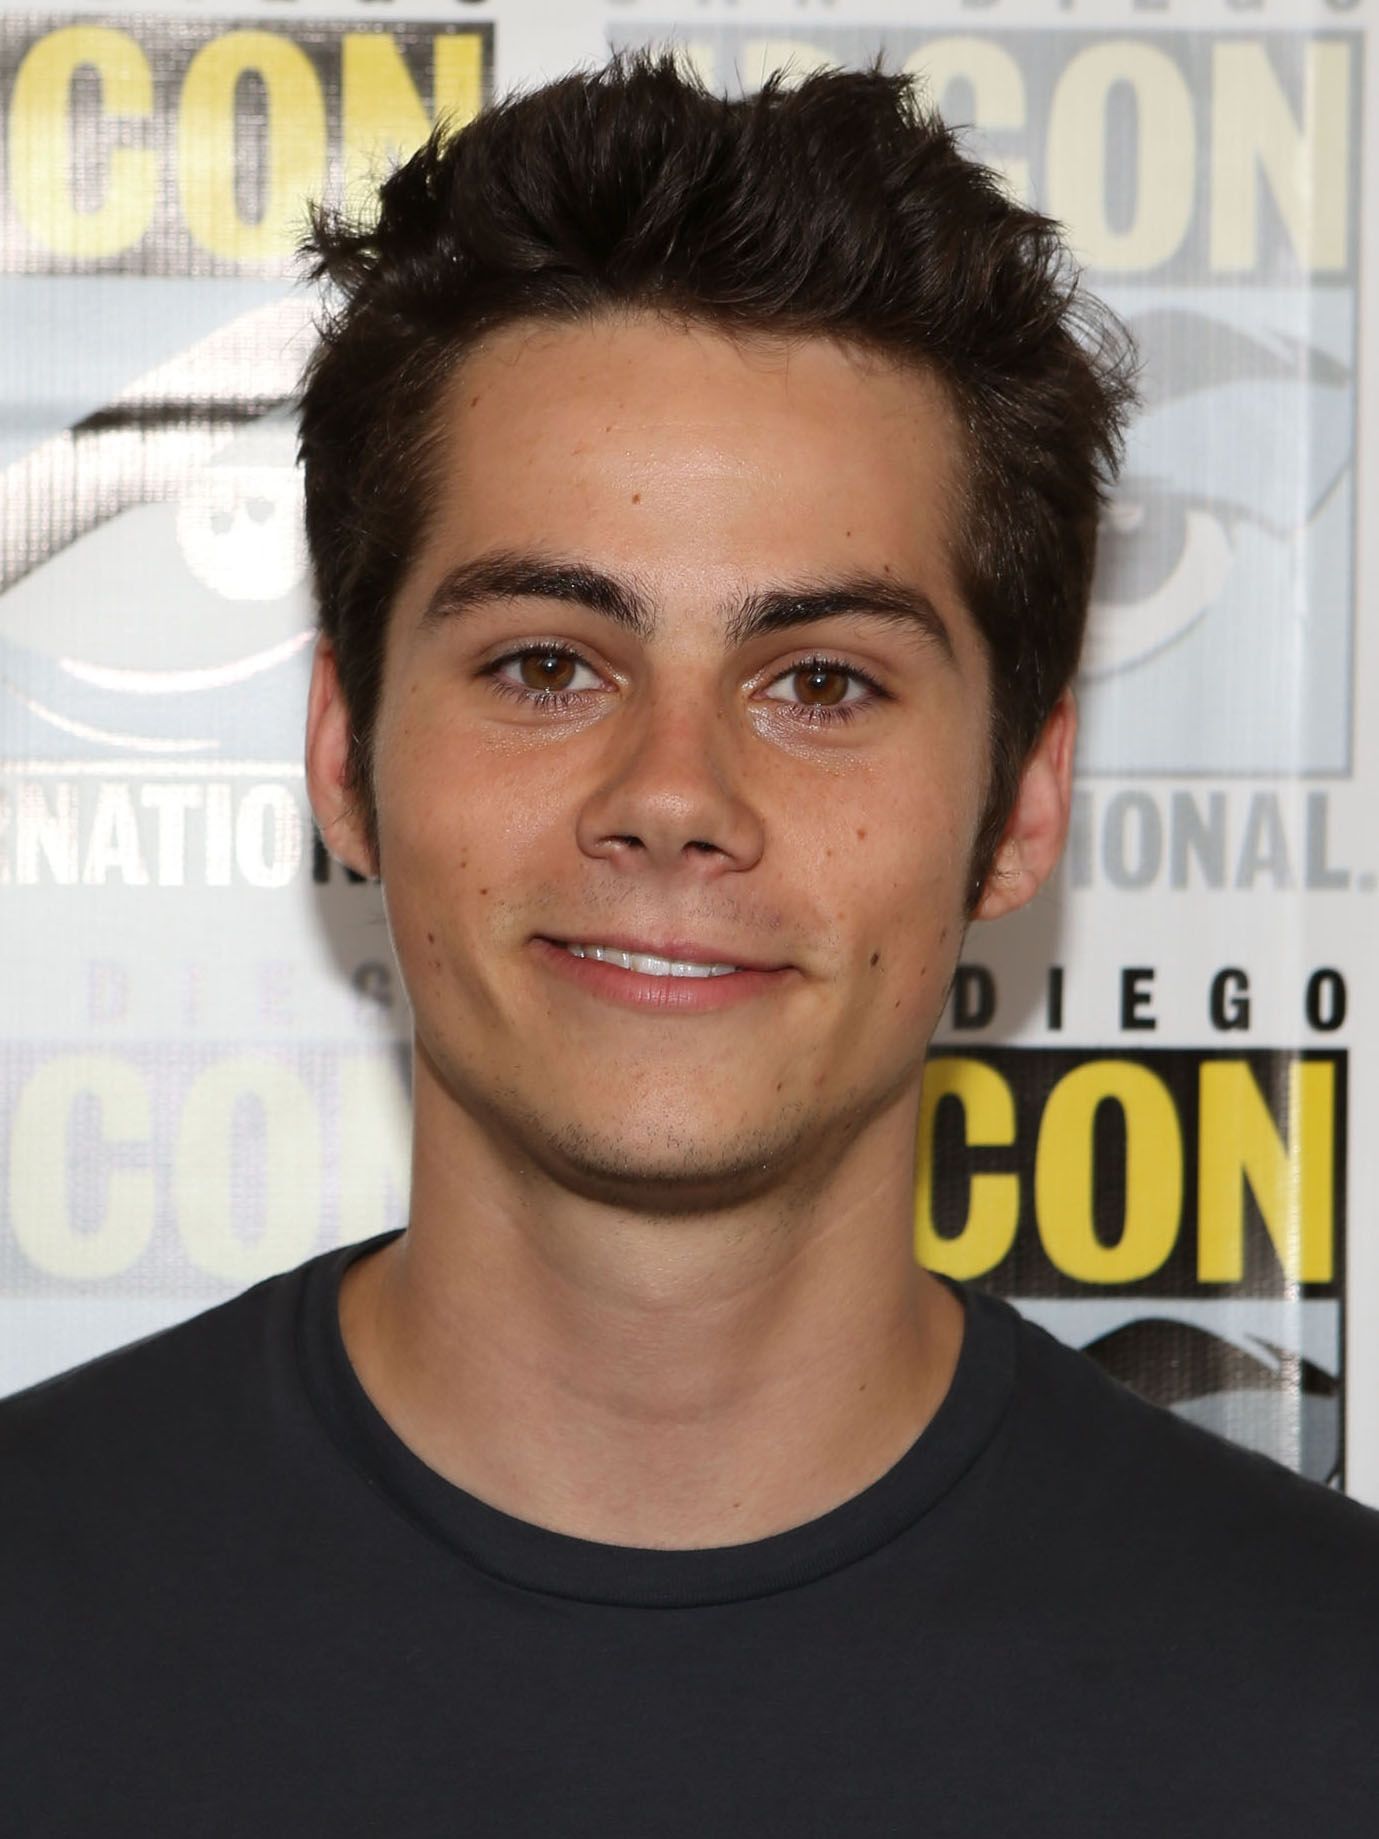 https://static.wikia.nocookie.net/teen-wolf-pack/images/0/0f/Dylan_O%27Brien.jpeg/revision/latest?cb=20200826123342